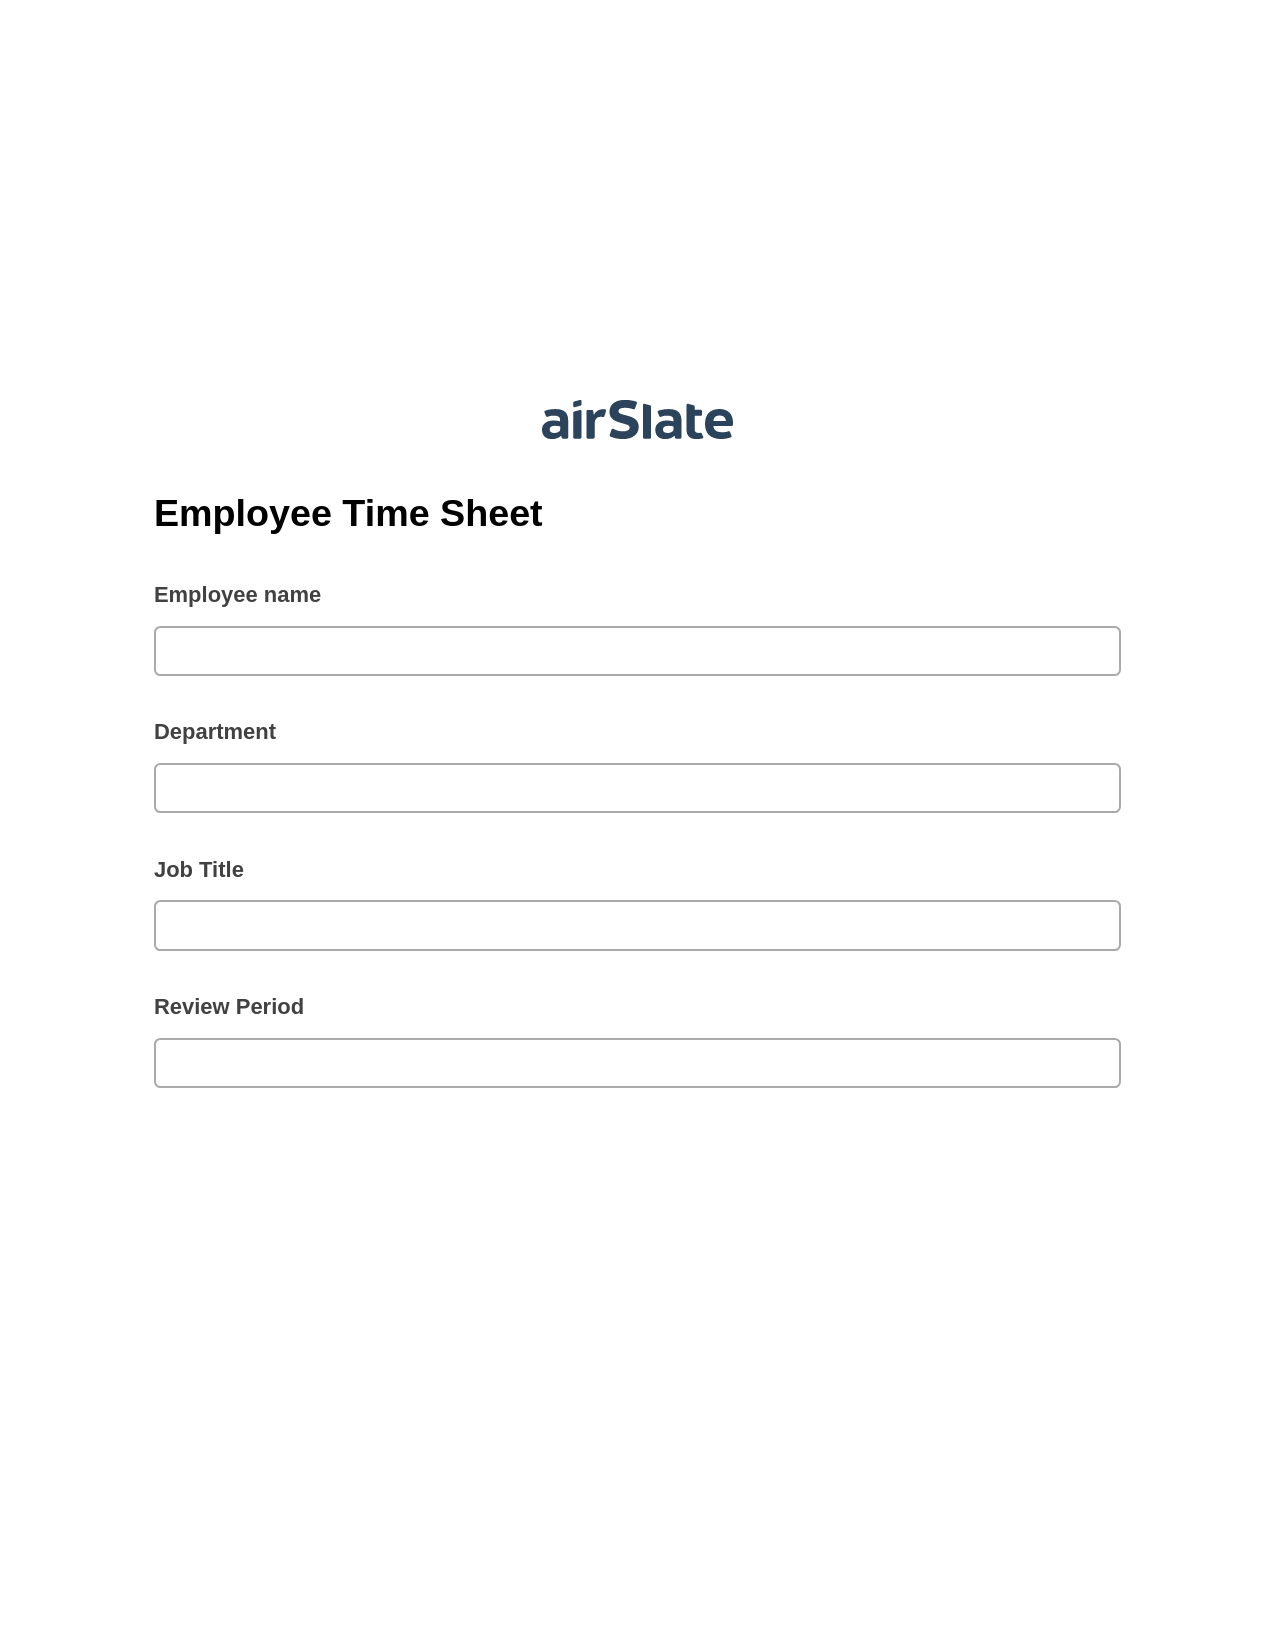 Employee Time Sheet Pre-fill from Salesforce Records with SOQL Bot, Create slate addon, Export to Google Sheet Bot